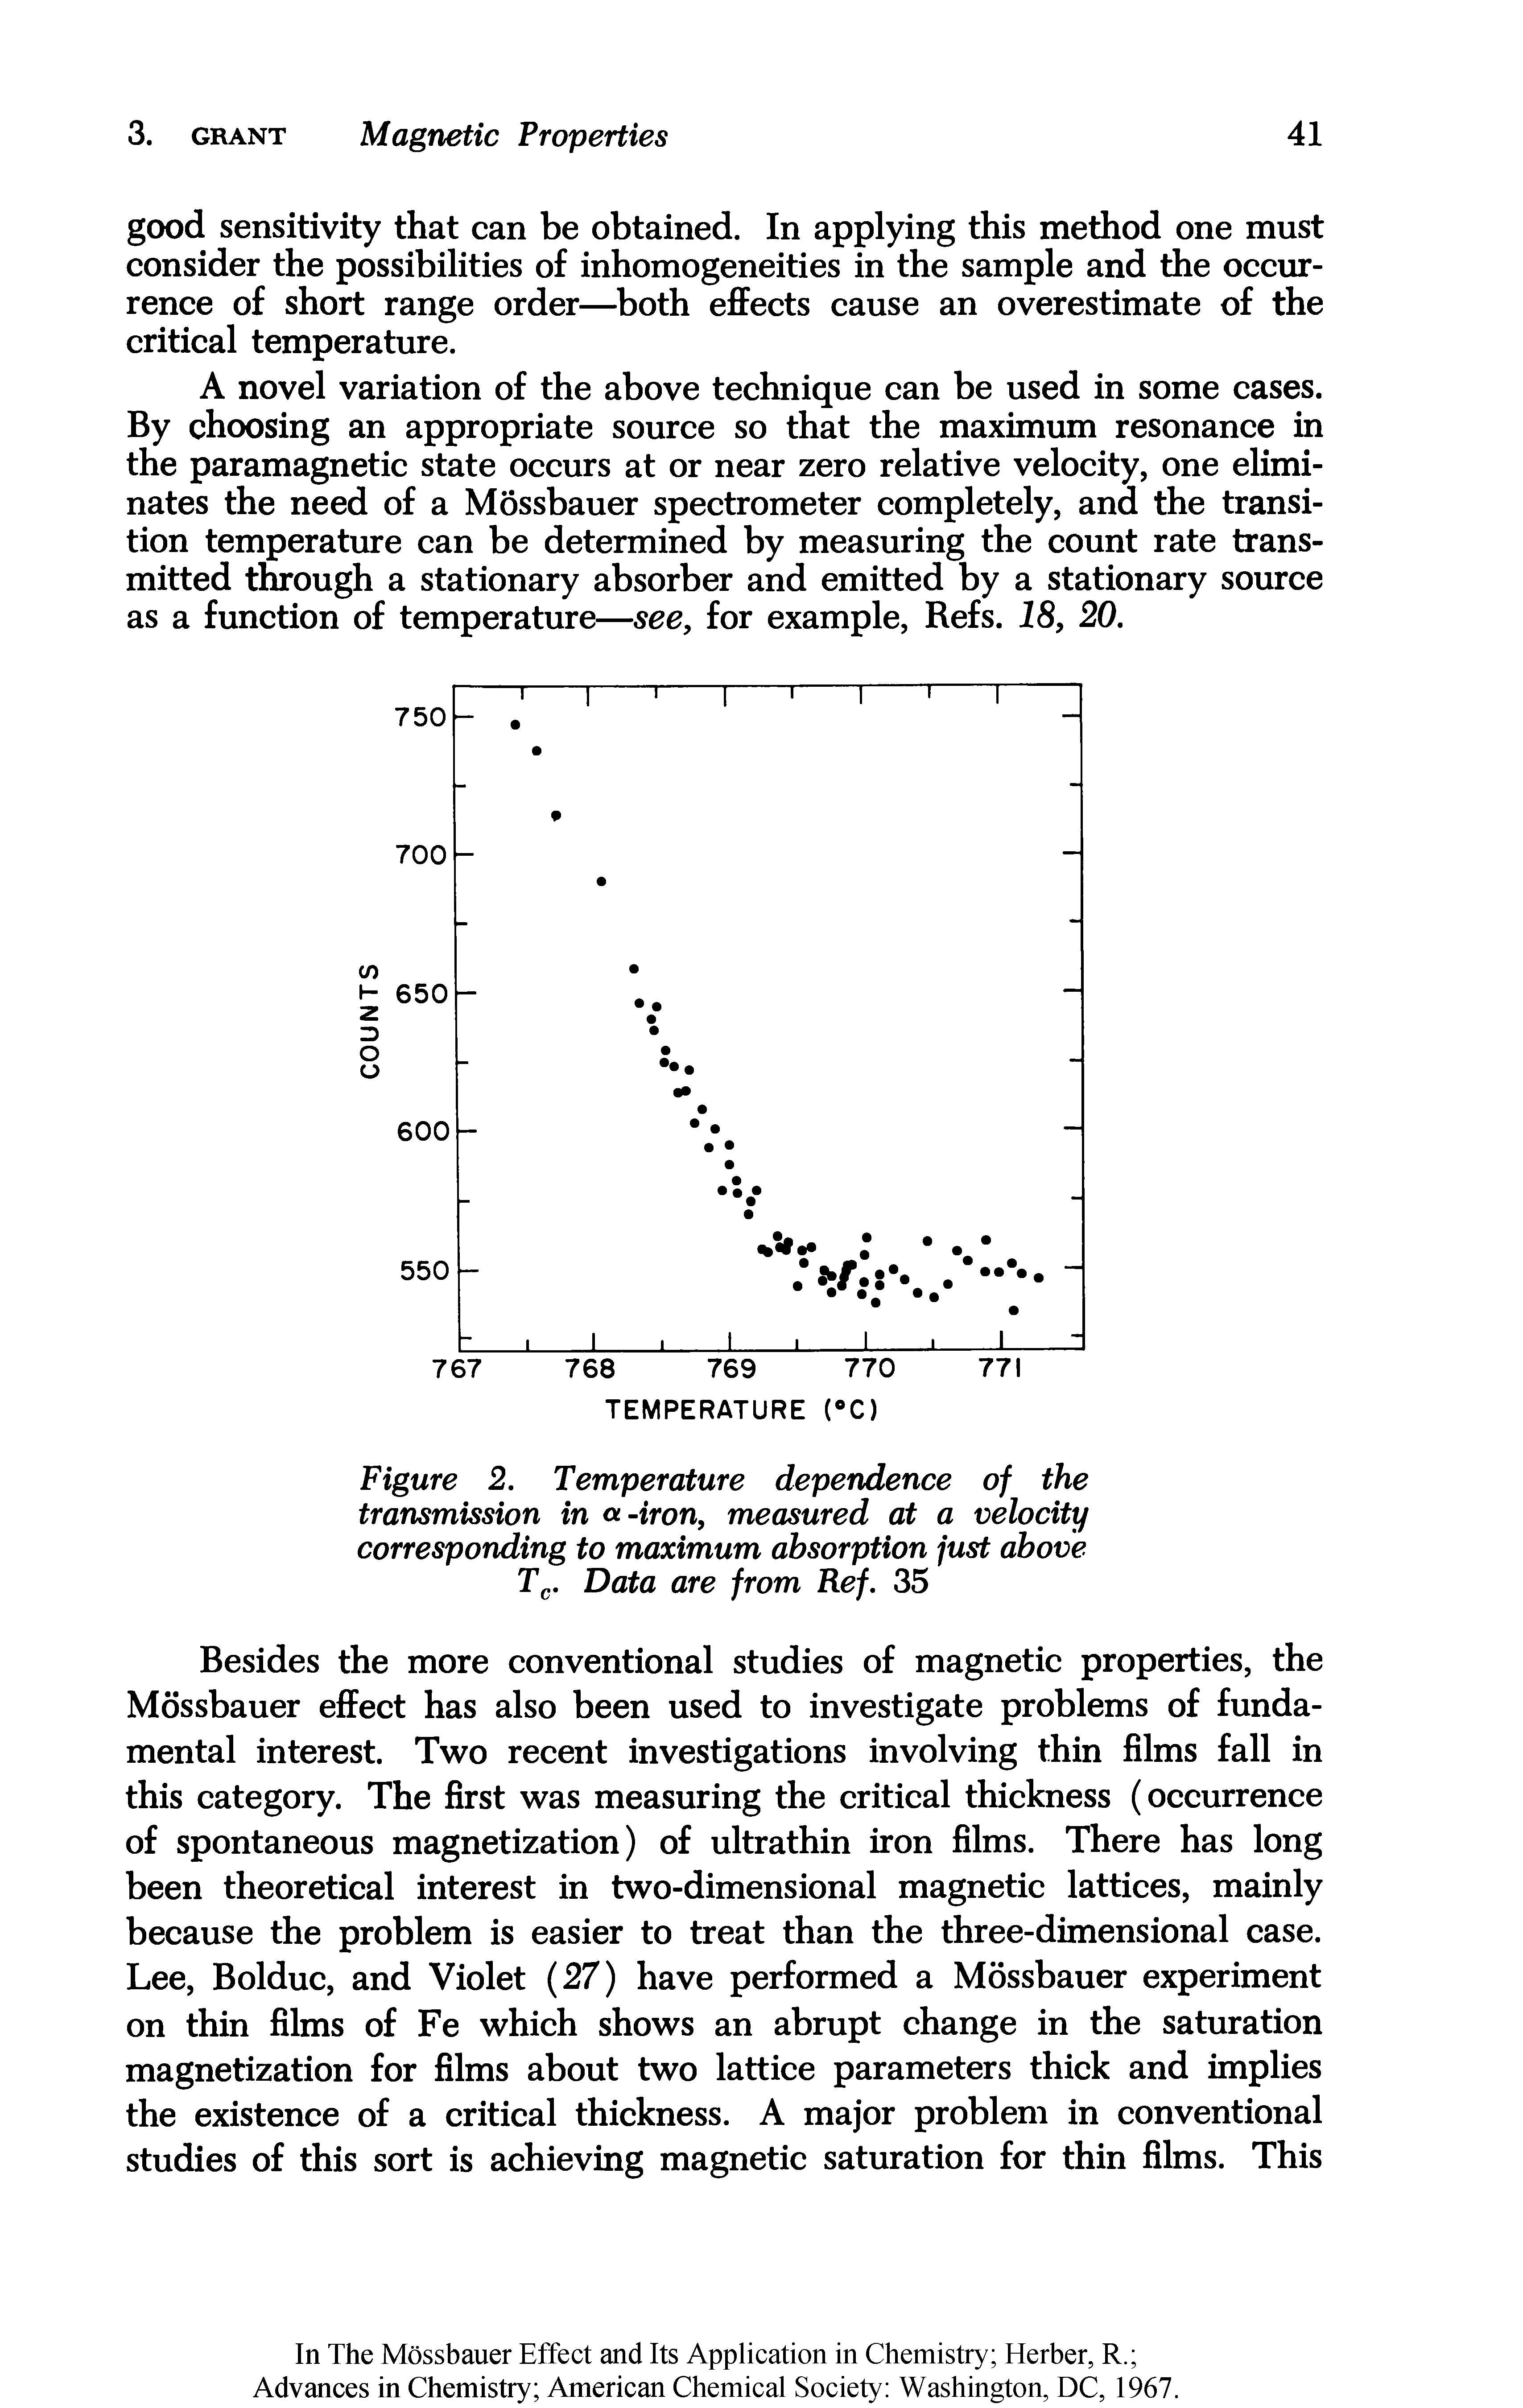 Figure 2. Temperature dependence of the transmission in a-iron, measured at a velocity corresponding to maximum absorption just above Tp. Data are from Ref. 35...